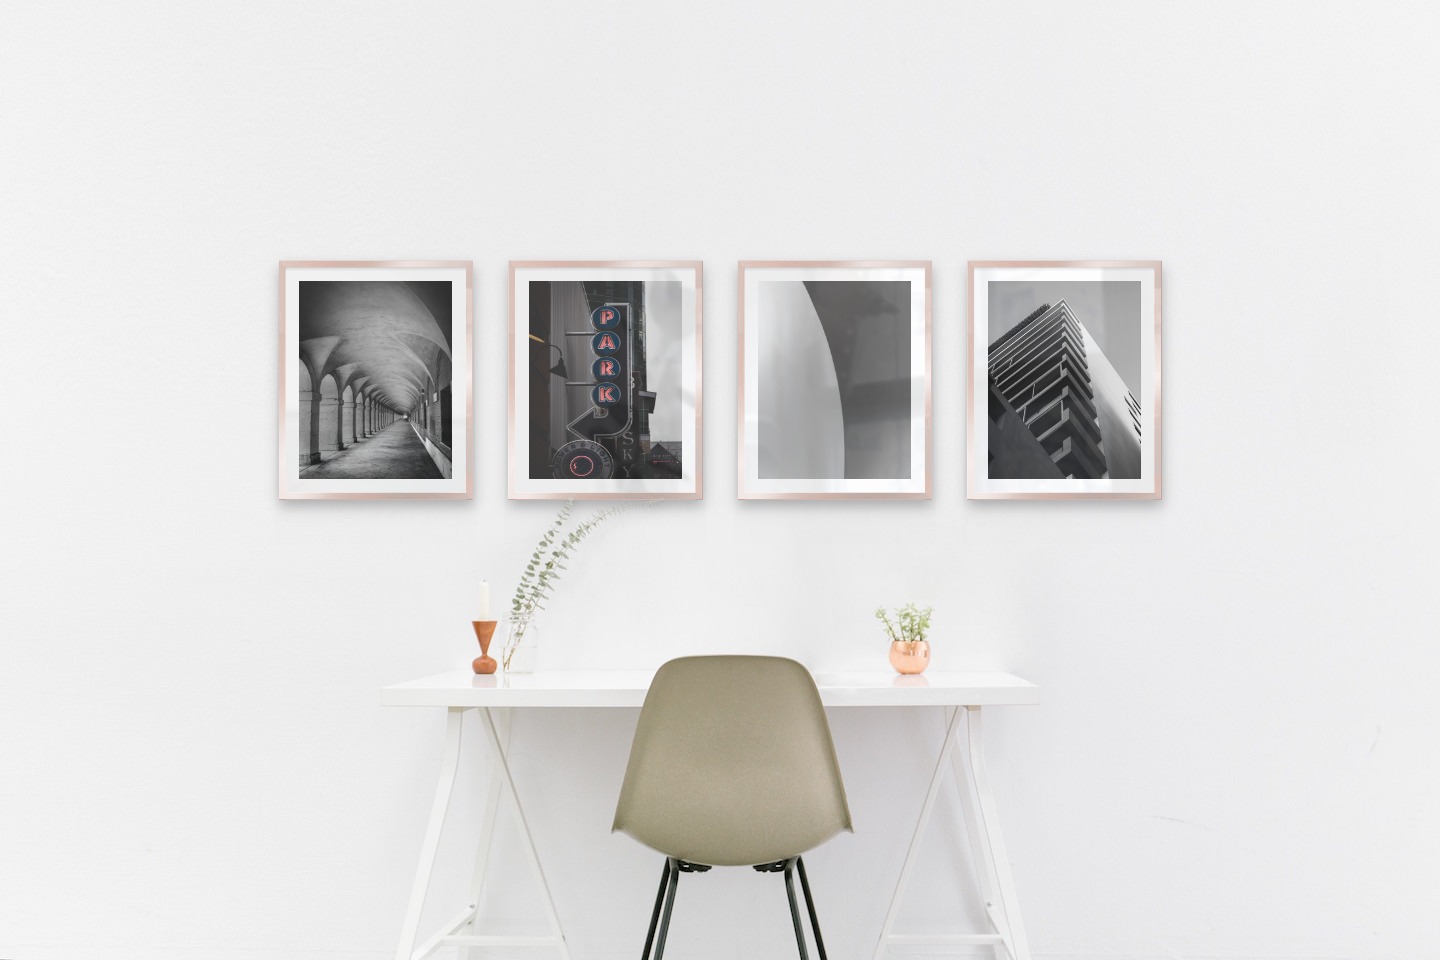 Gallery wall with picture frames in copper in sizes 40x50 with prints "Hallway with pillars and arches", "Sign "Park"", "Line" and "Black and white building"